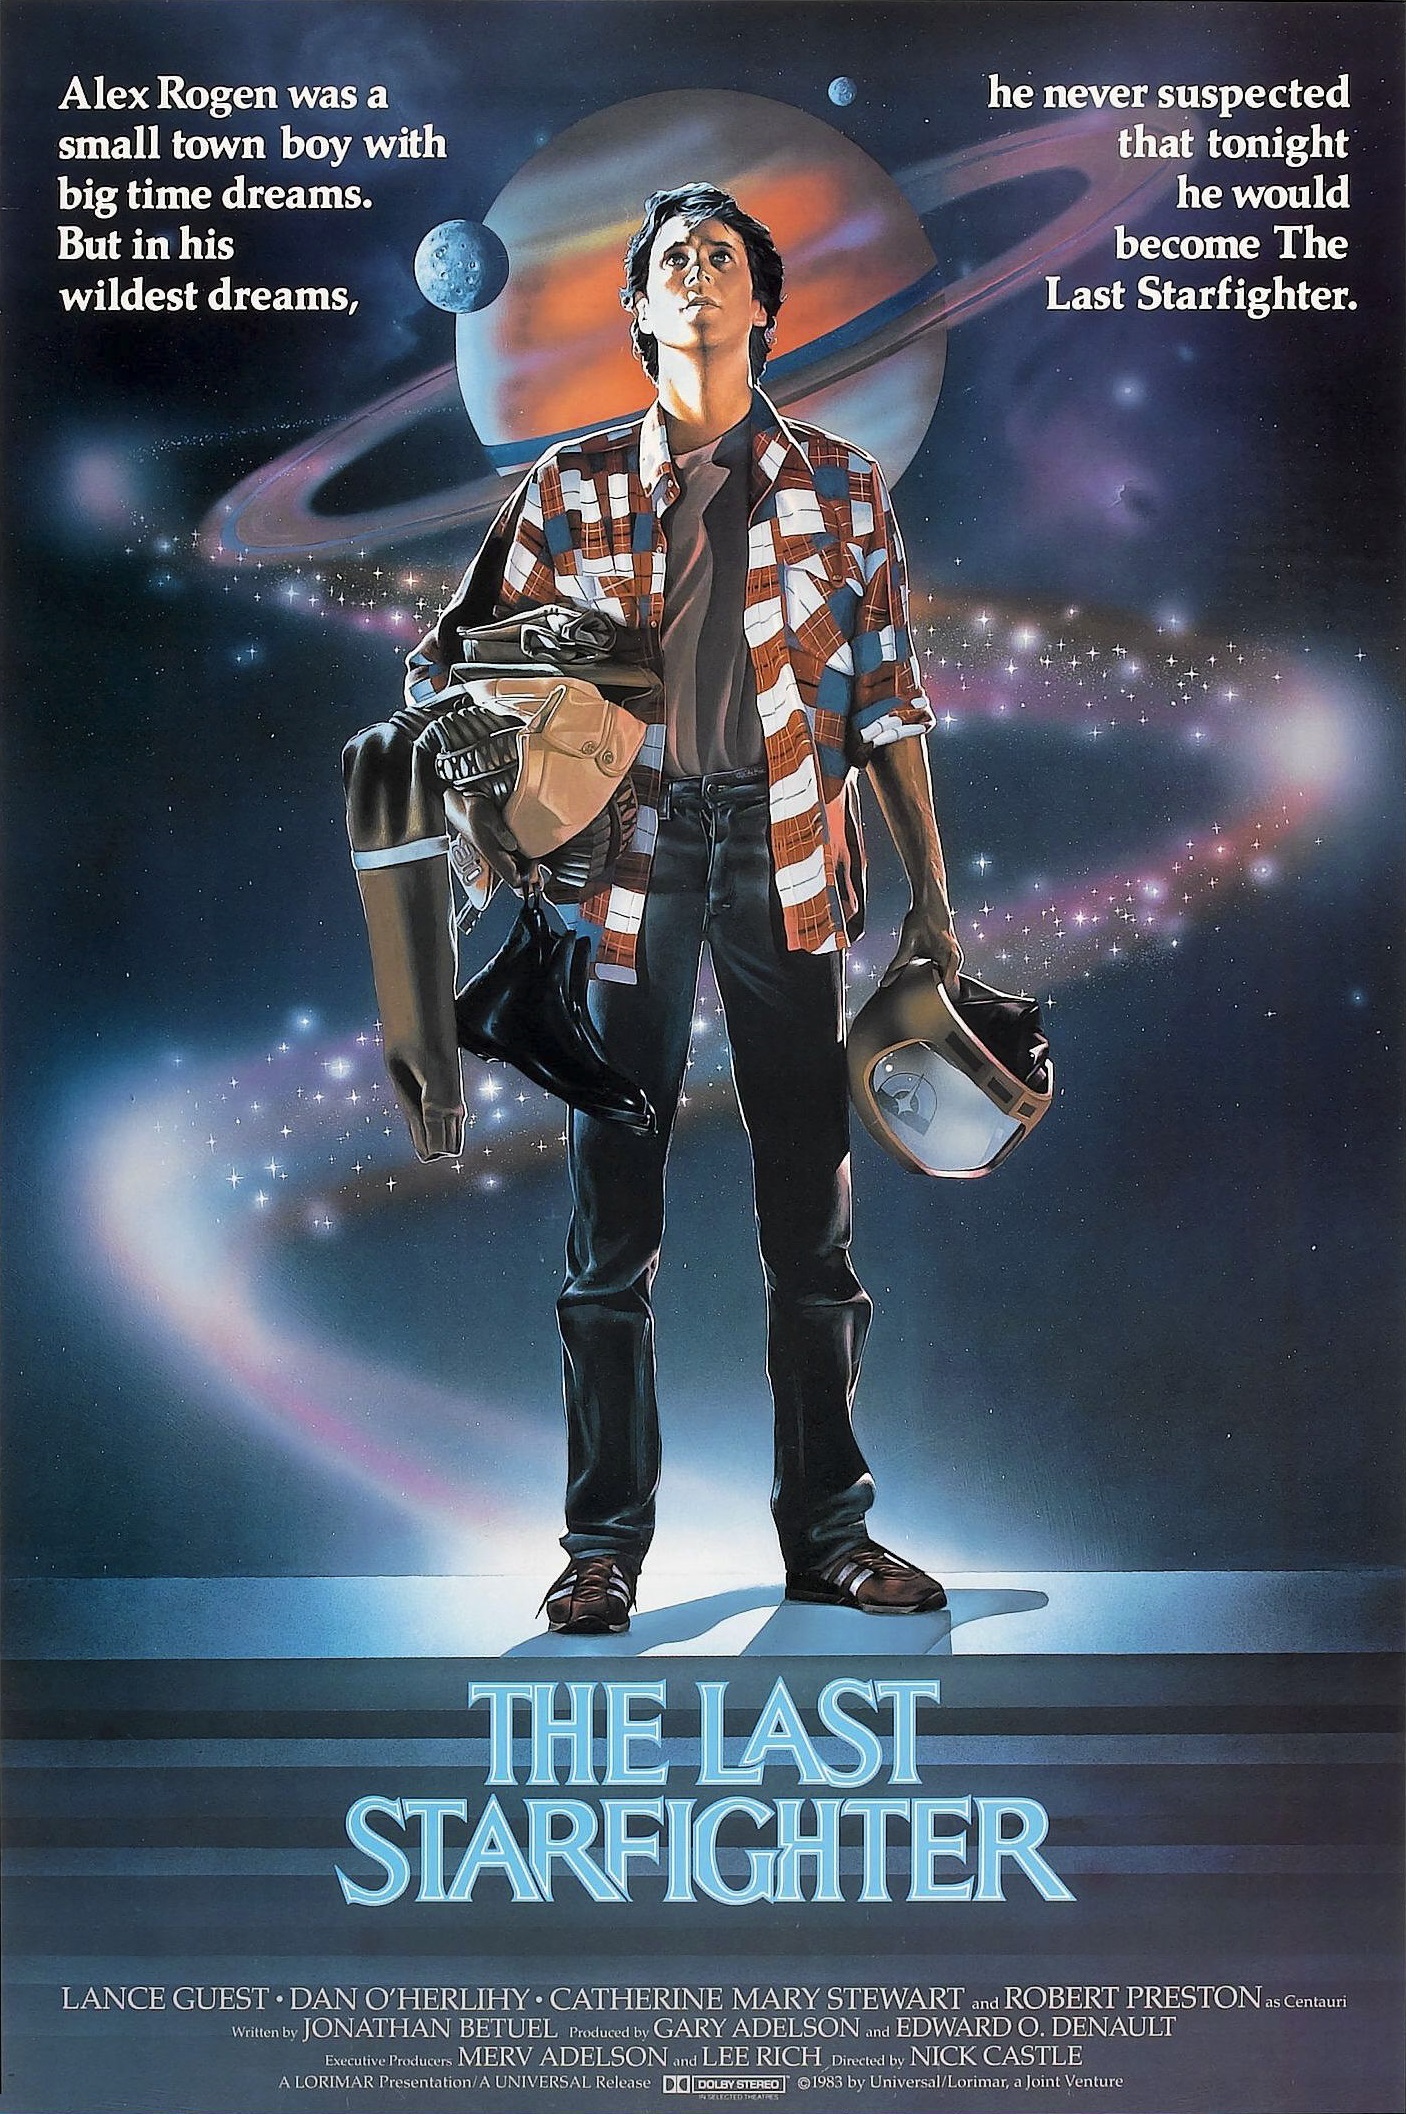 Zero-5 was based on the space shooter scenes in the movie The Last Starfighter.